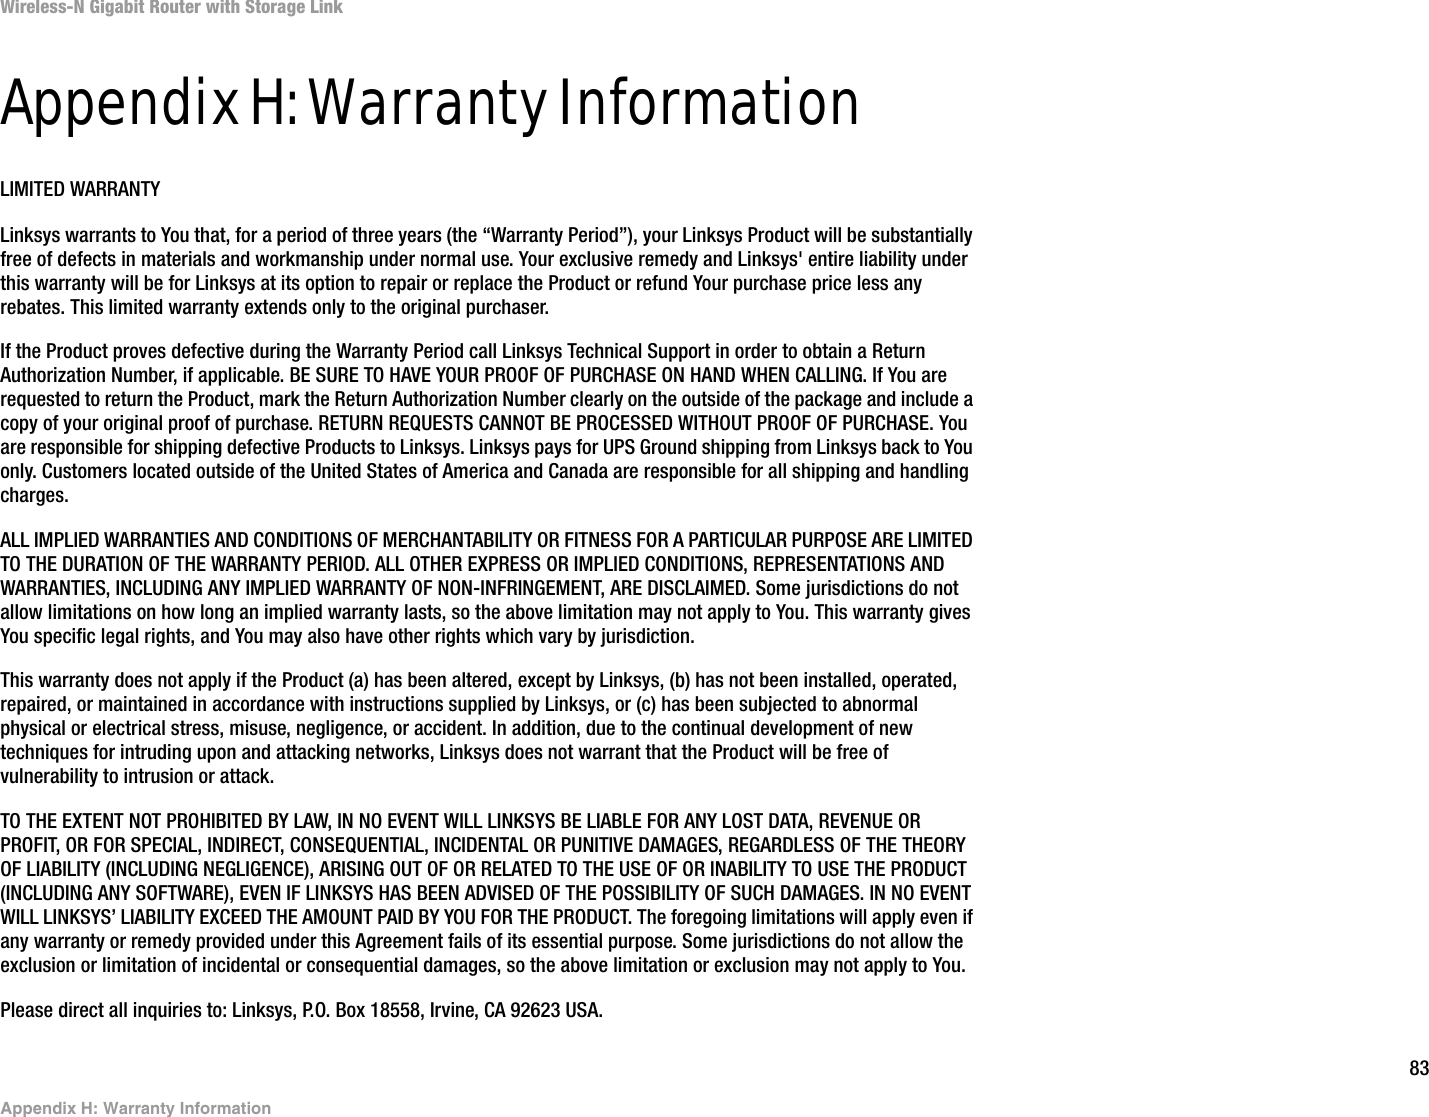 83Appendix H: Warranty InformationWireless-N Gigabit Router with Storage LinkAppendix H: Warranty InformationLIMITED WARRANTYLinksys warrants to You that, for a period of three years (the “Warranty Period”), your Linksys Product will be substantially free of defects in materials and workmanship under normal use. Your exclusive remedy and Linksys&apos; entire liability under this warranty will be for Linksys at its option to repair or replace the Product or refund Your purchase price less any rebates. This limited warranty extends only to the original purchaser. If the Product proves defective during the Warranty Period call Linksys Technical Support in order to obtain a Return Authorization Number, if applicable. BE SURE TO HAVE YOUR PROOF OF PURCHASE ON HAND WHEN CALLING. If You are requested to return the Product, mark the Return Authorization Number clearly on the outside of the package and include a copy of your original proof of purchase. RETURN REQUESTS CANNOT BE PROCESSED WITHOUT PROOF OF PURCHASE. You are responsible for shipping defective Products to Linksys. Linksys pays for UPS Ground shipping from Linksys back to You only. Customers located outside of the United States of America and Canada are responsible for all shipping and handling charges. ALL IMPLIED WARRANTIES AND CONDITIONS OF MERCHANTABILITY OR FITNESS FOR A PARTICULAR PURPOSE ARE LIMITED TO THE DURATION OF THE WARRANTY PERIOD. ALL OTHER EXPRESS OR IMPLIED CONDITIONS, REPRESENTATIONS AND WARRANTIES, INCLUDING ANY IMPLIED WARRANTY OF NON-INFRINGEMENT, ARE DISCLAIMED. Some jurisdictions do not allow limitations on how long an implied warranty lasts, so the above limitation may not apply to You. This warranty gives You specific legal rights, and You may also have other rights which vary by jurisdiction.This warranty does not apply if the Product (a) has been altered, except by Linksys, (b) has not been installed, operated, repaired, or maintained in accordance with instructions supplied by Linksys, or (c) has been subjected to abnormal physical or electrical stress, misuse, negligence, or accident. In addition, due to the continual development of new techniques for intruding upon and attacking networks, Linksys does not warrant that the Product will be free of vulnerability to intrusion or attack.TO THE EXTENT NOT PROHIBITED BY LAW, IN NO EVENT WILL LINKSYS BE LIABLE FOR ANY LOST DATA, REVENUE OR PROFIT, OR FOR SPECIAL, INDIRECT, CONSEQUENTIAL, INCIDENTAL OR PUNITIVE DAMAGES, REGARDLESS OF THE THEORY OF LIABILITY (INCLUDING NEGLIGENCE), ARISING OUT OF OR RELATED TO THE USE OF OR INABILITY TO USE THE PRODUCT (INCLUDING ANY SOFTWARE), EVEN IF LINKSYS HAS BEEN ADVISED OF THE POSSIBILITY OF SUCH DAMAGES. IN NO EVENT WILL LINKSYS’ LIABILITY EXCEED THE AMOUNT PAID BY YOU FOR THE PRODUCT. The foregoing limitations will apply even if any warranty or remedy provided under this Agreement fails of its essential purpose. Some jurisdictions do not allow the exclusion or limitation of incidental or consequential damages, so the above limitation or exclusion may not apply to You.Please direct all inquiries to: Linksys, P.O. Box 18558, Irvine, CA 92623 USA.